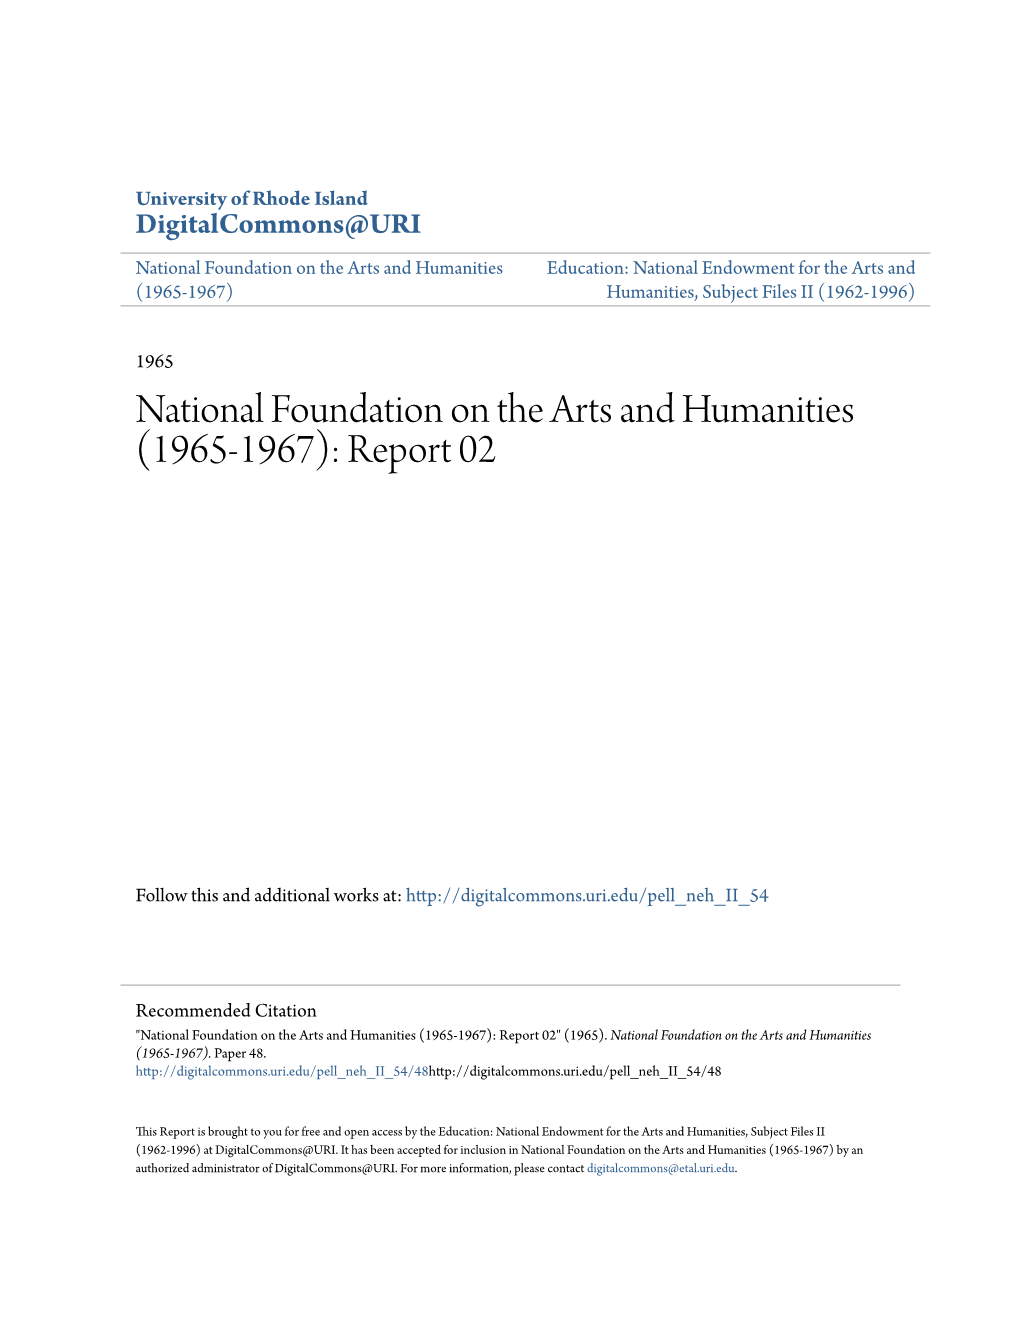 National Foundation on the Arts and Humanities (1965-1967): Report 02